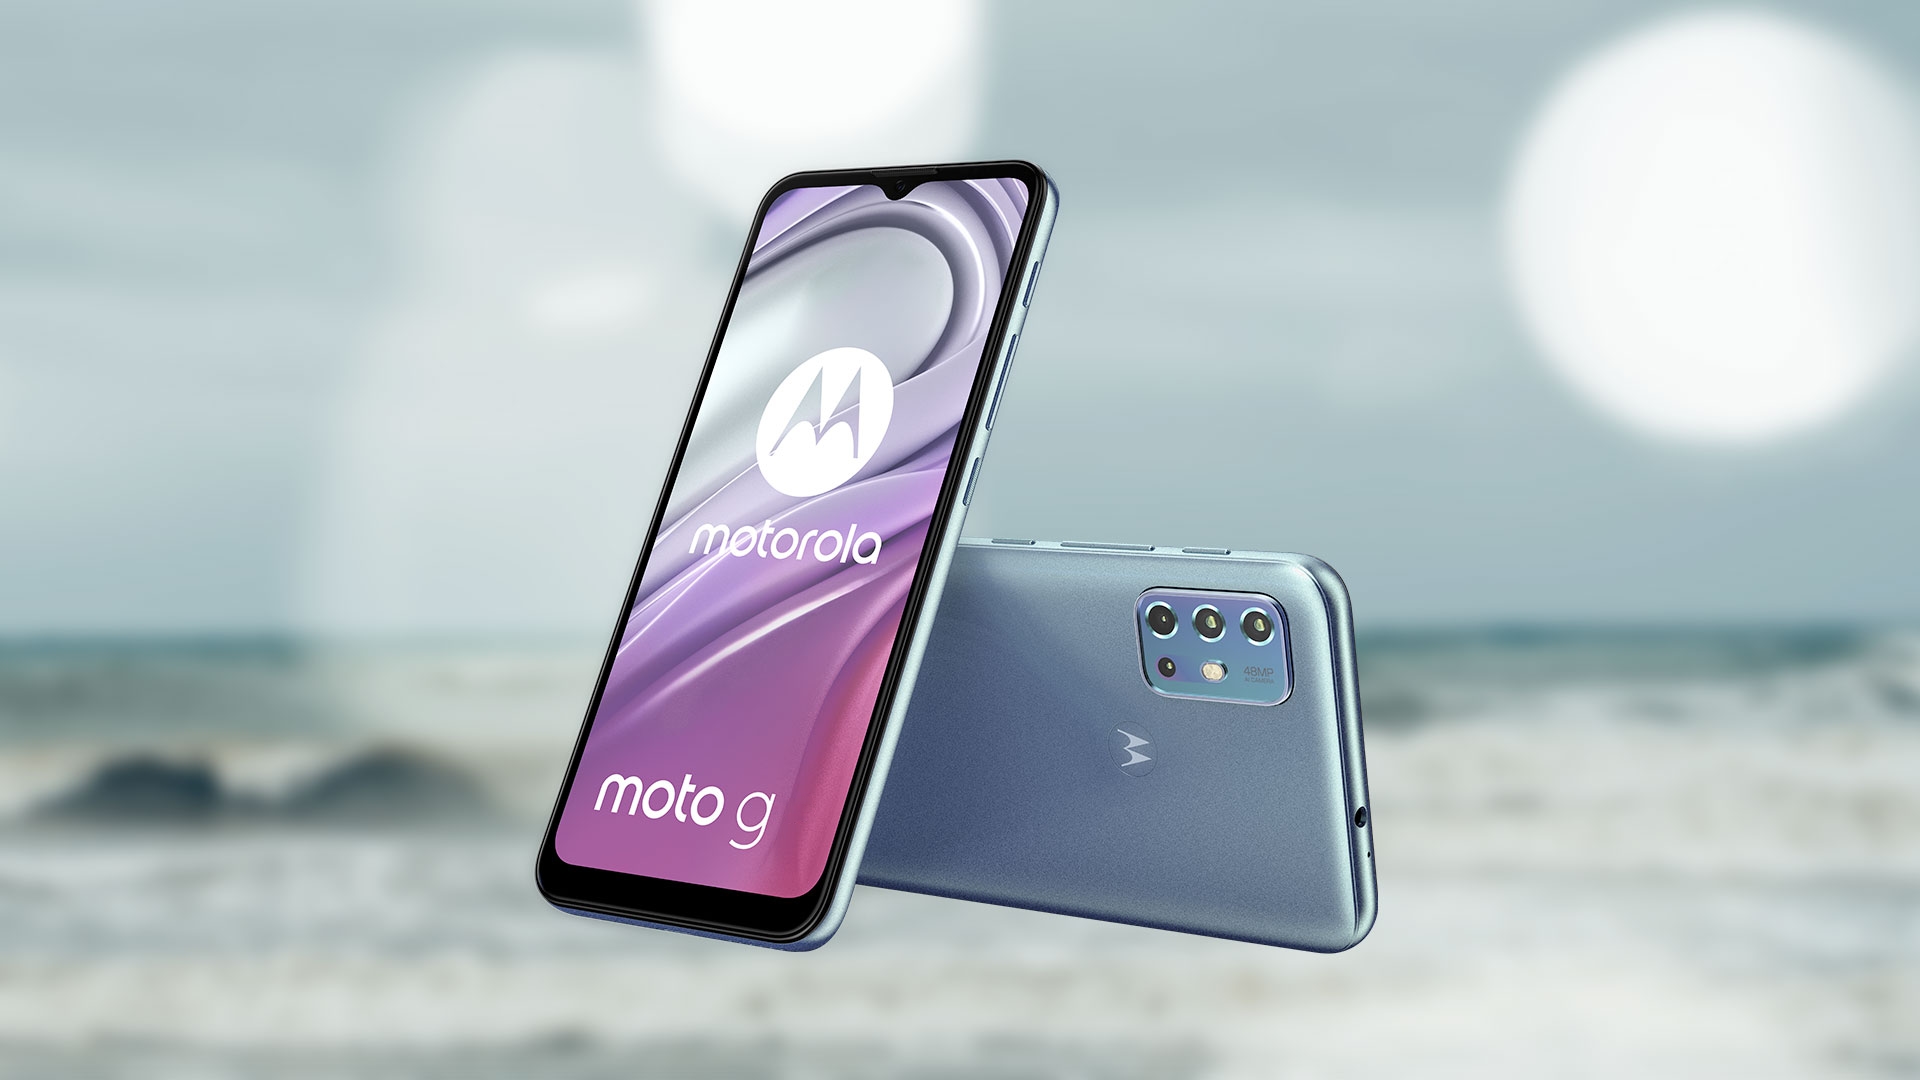 Motorola working on Moto G22 smartphone with MediaTek Helio P35 chip and Android 11 on board